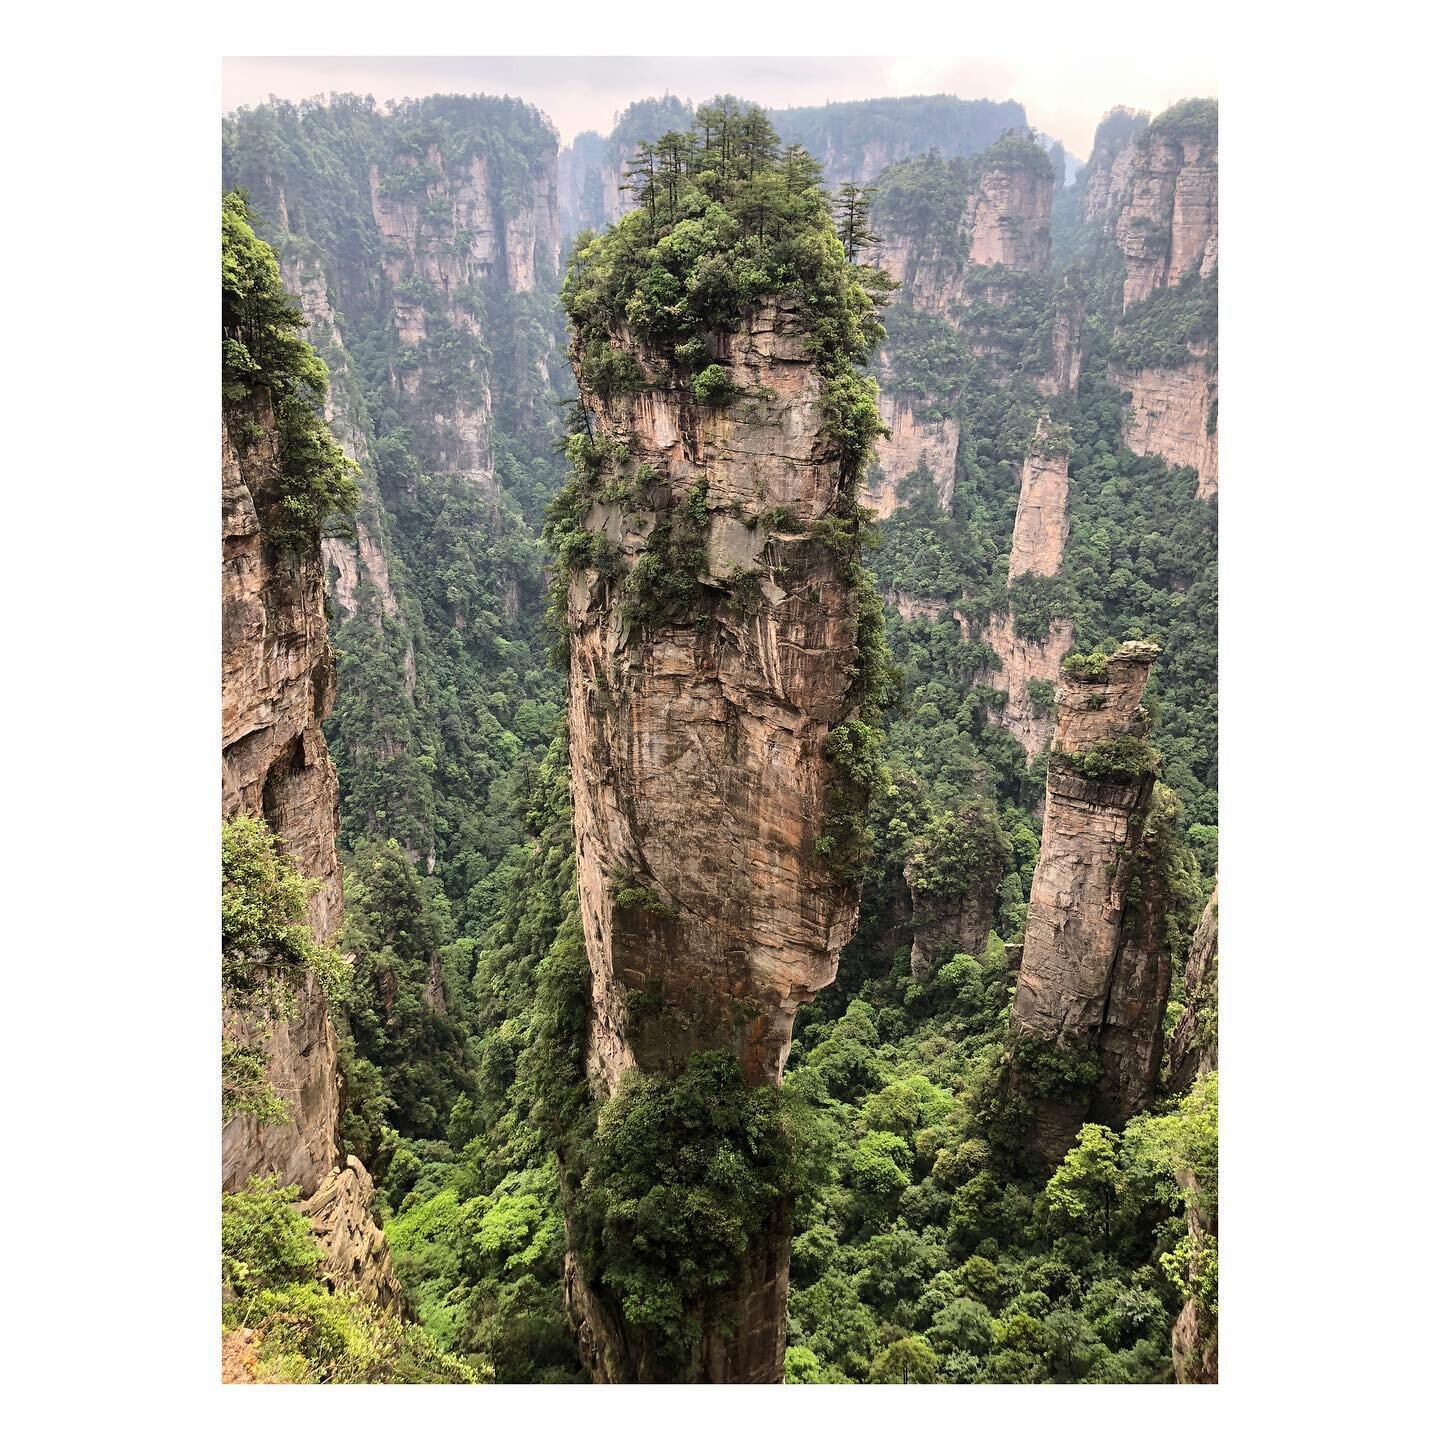 HAPPY 🌏 DAY! This photo needed no filter. I took when visiting China back in 2018. These insane pillar rock formations are comprised of quartz and sand stone!!! Yep, you heard that right, CRYSTALS! Over 61 million tourist come and experience this in